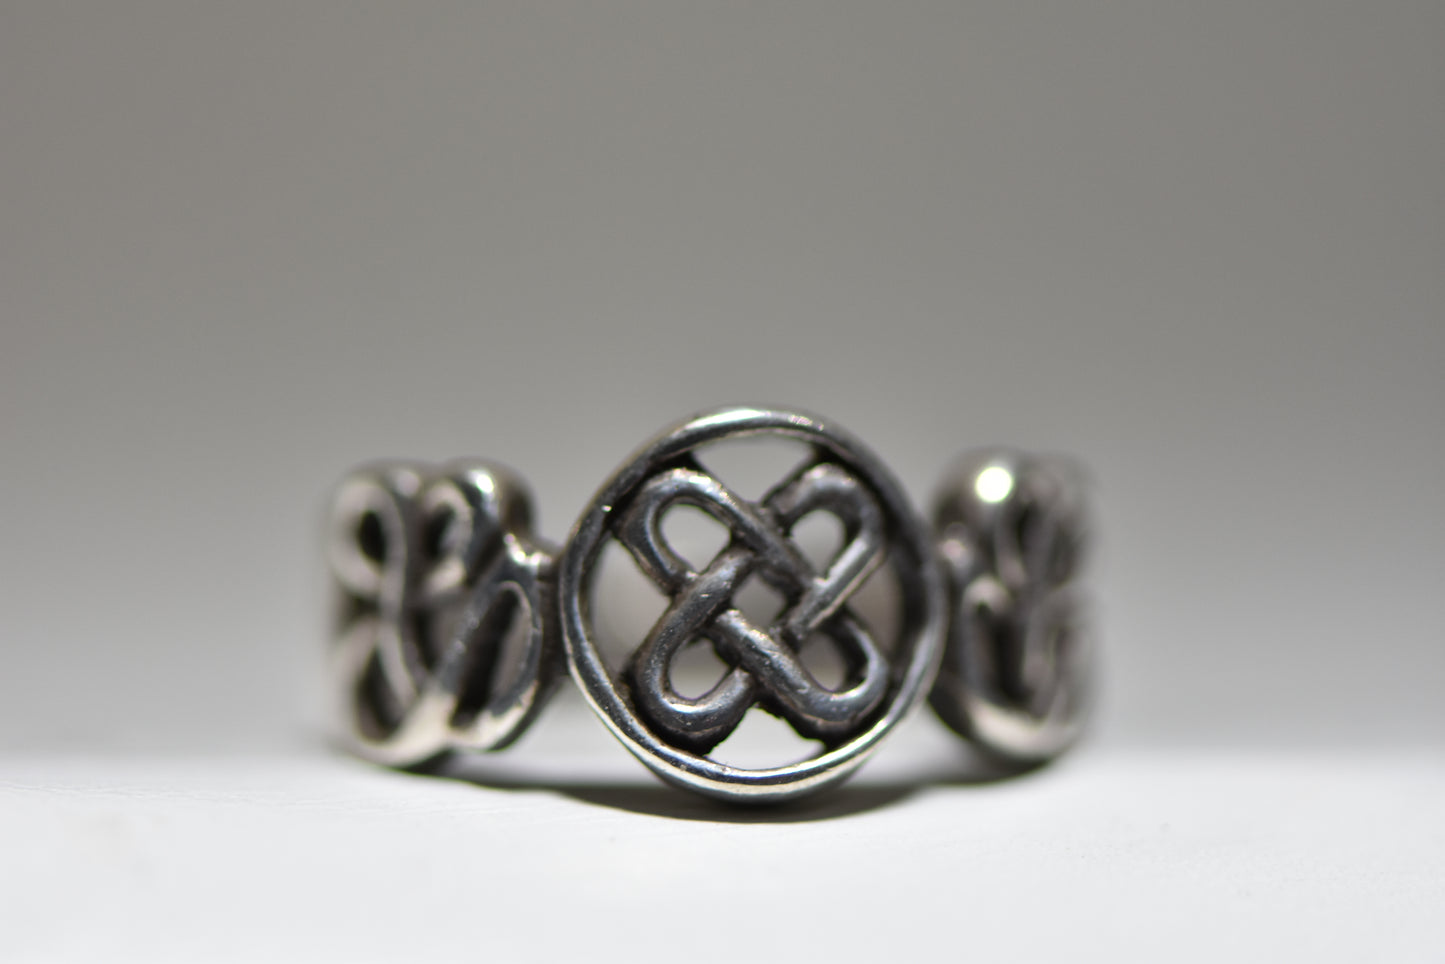 Celtic ring knots band rope  women men sterling silver